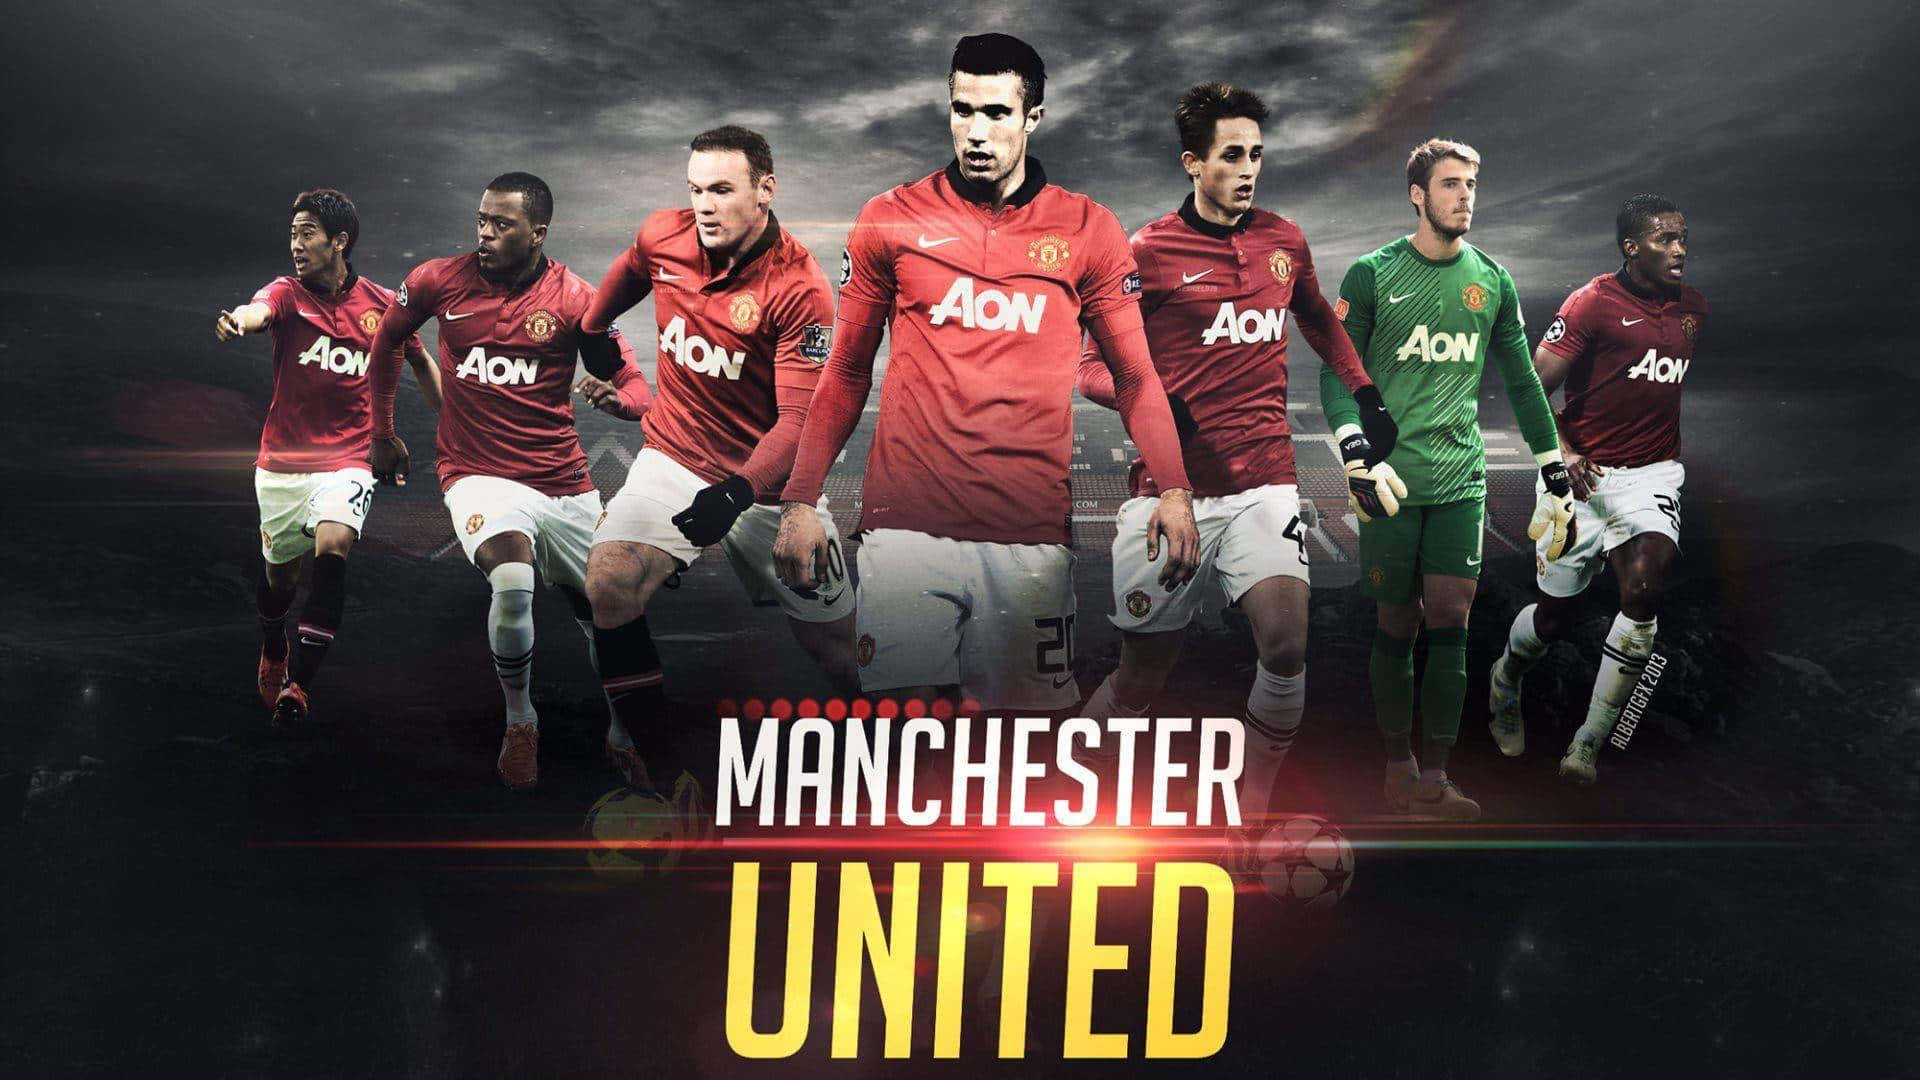 The Manchester United Team Wallpaper